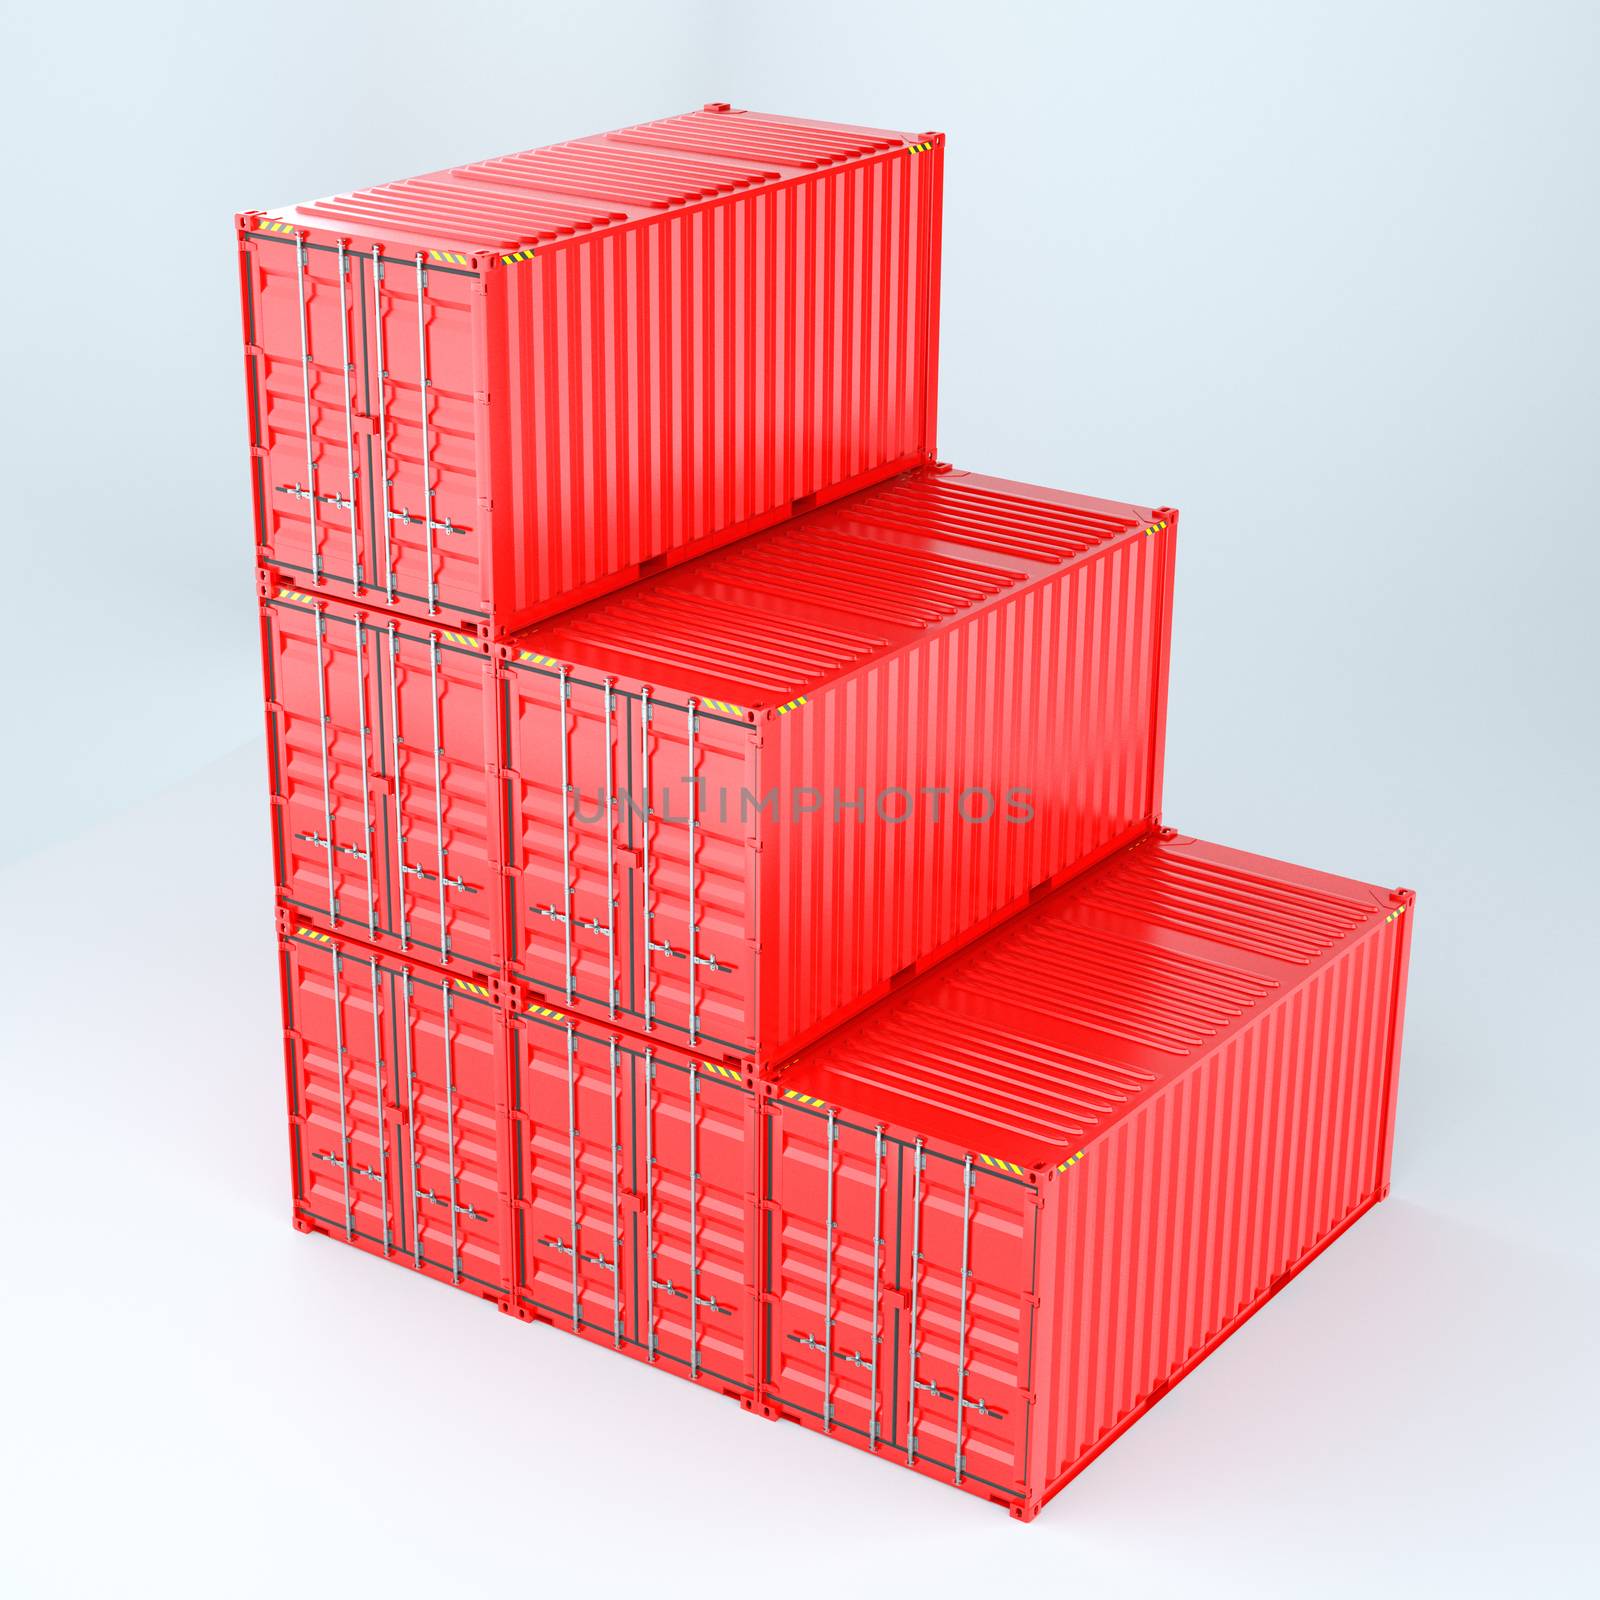 3d rendering of a shipping 20ft containers by cherezoff